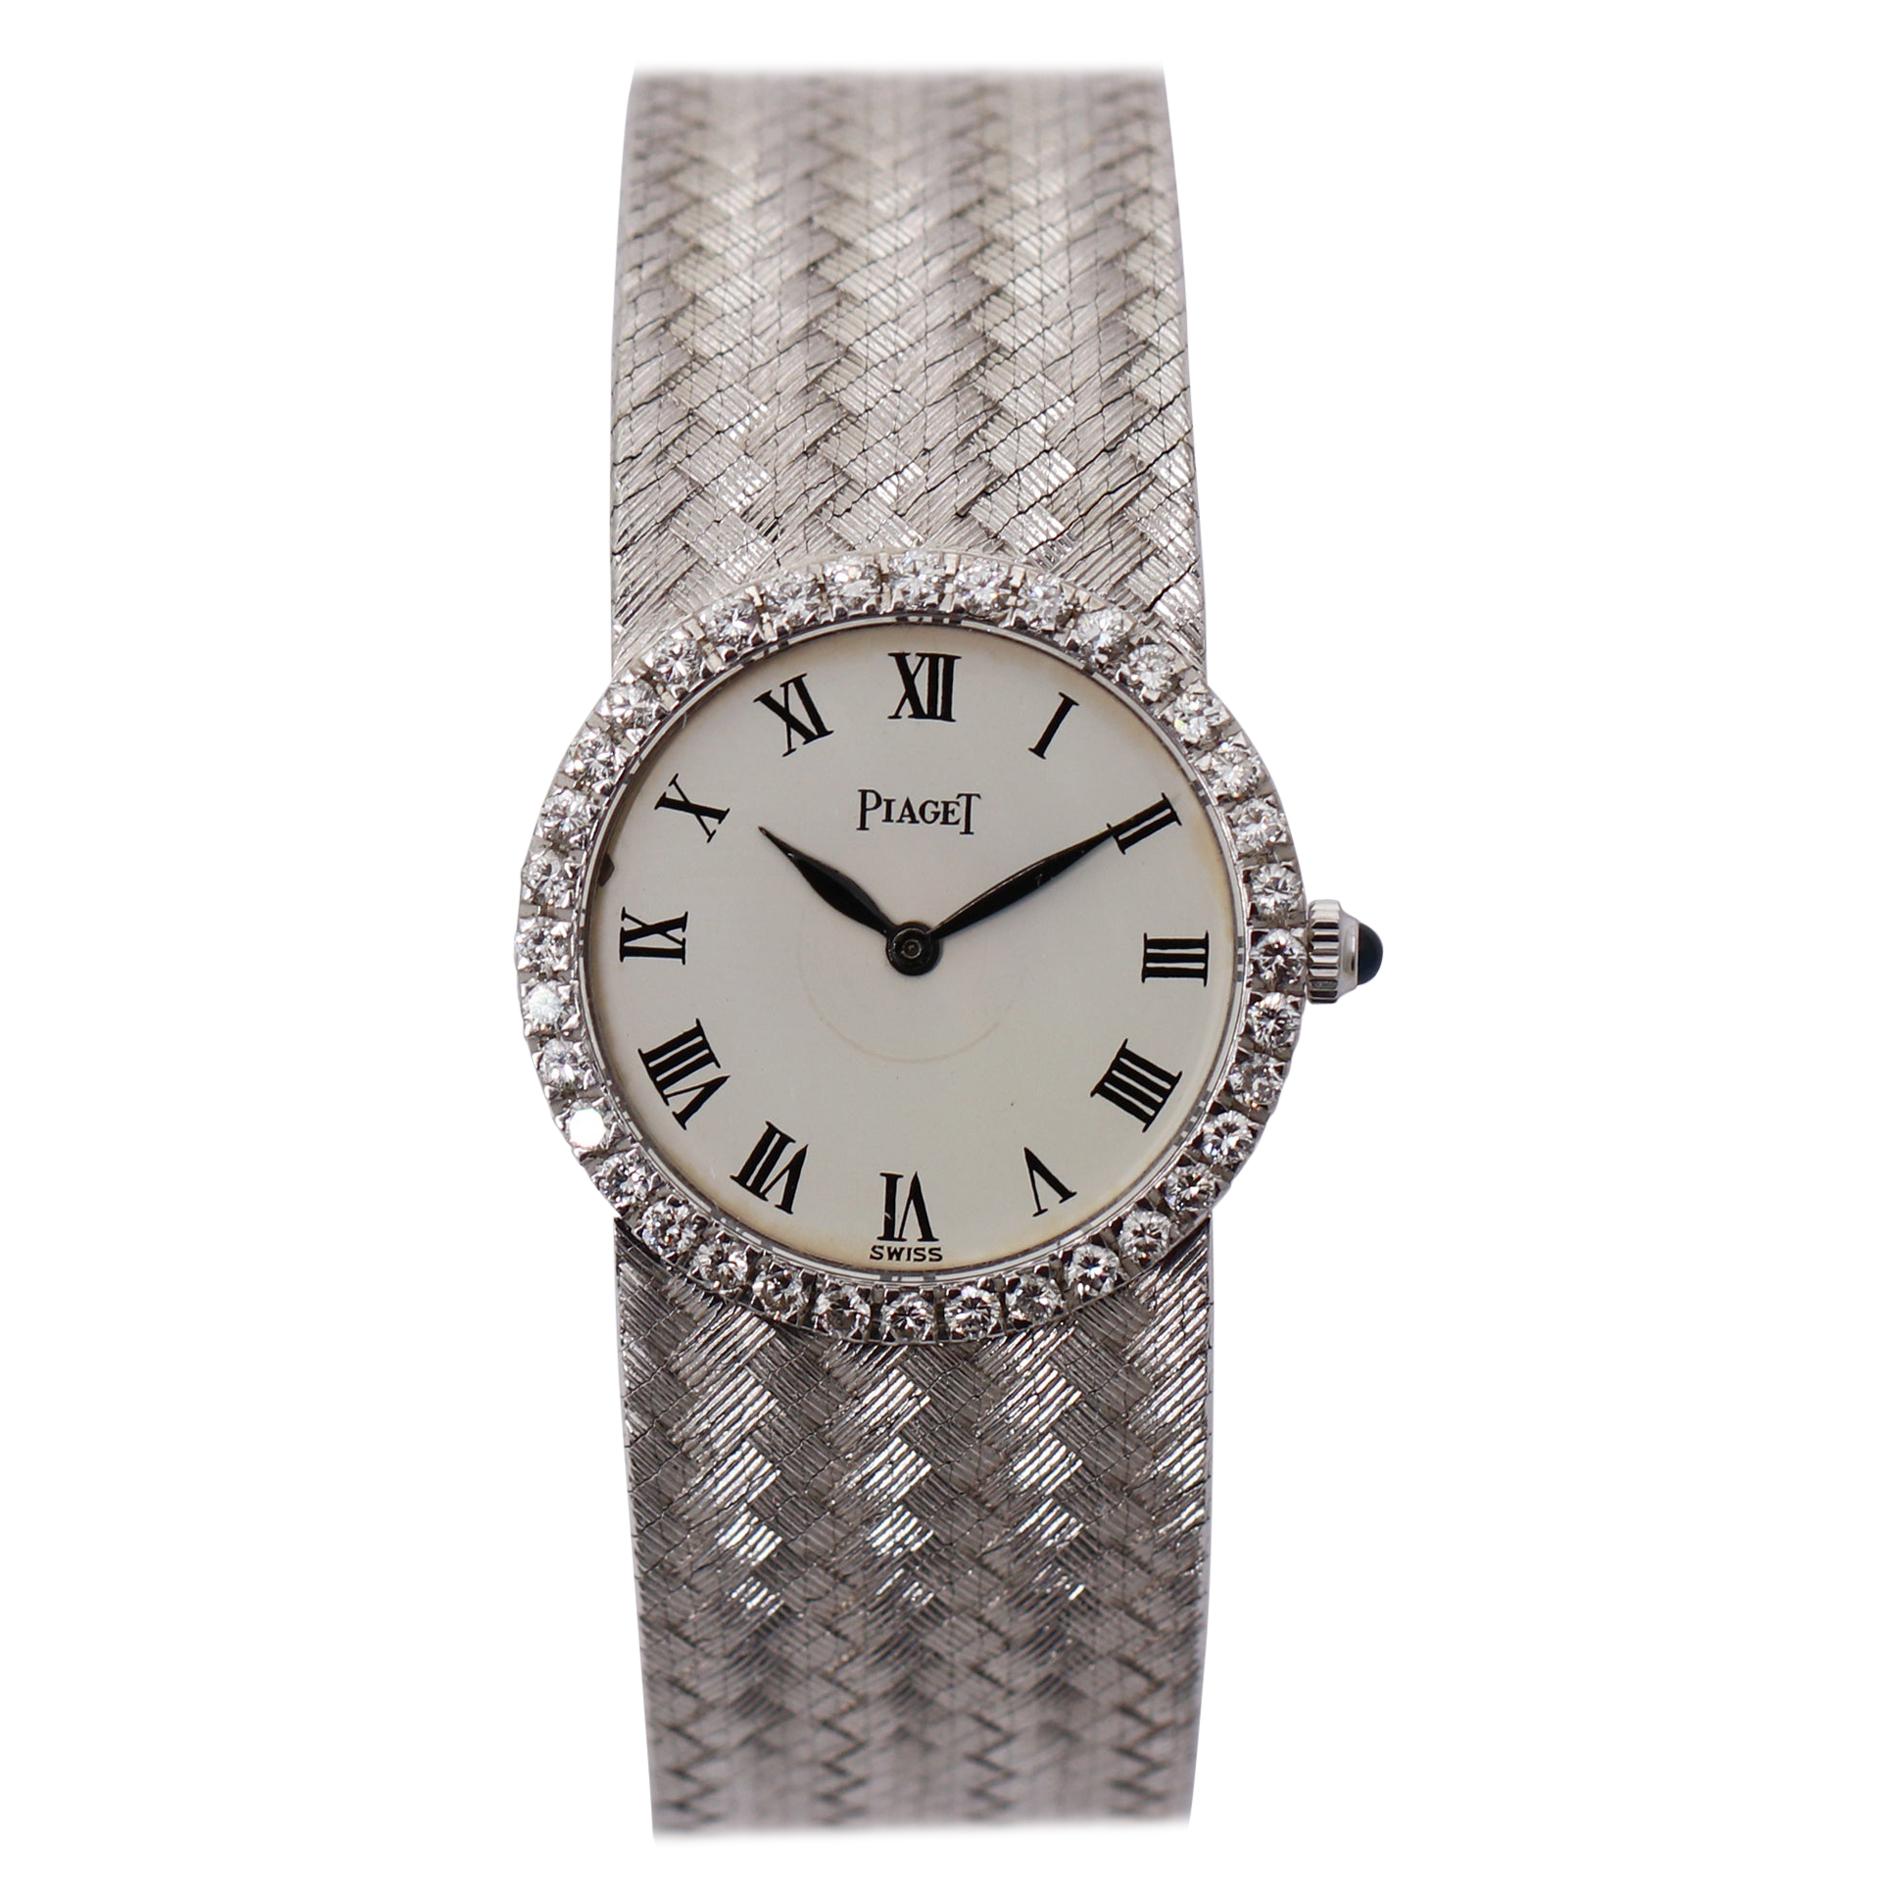 Ladies Piaget Watch with Roman Numeral White Dial and Diamond Bezel